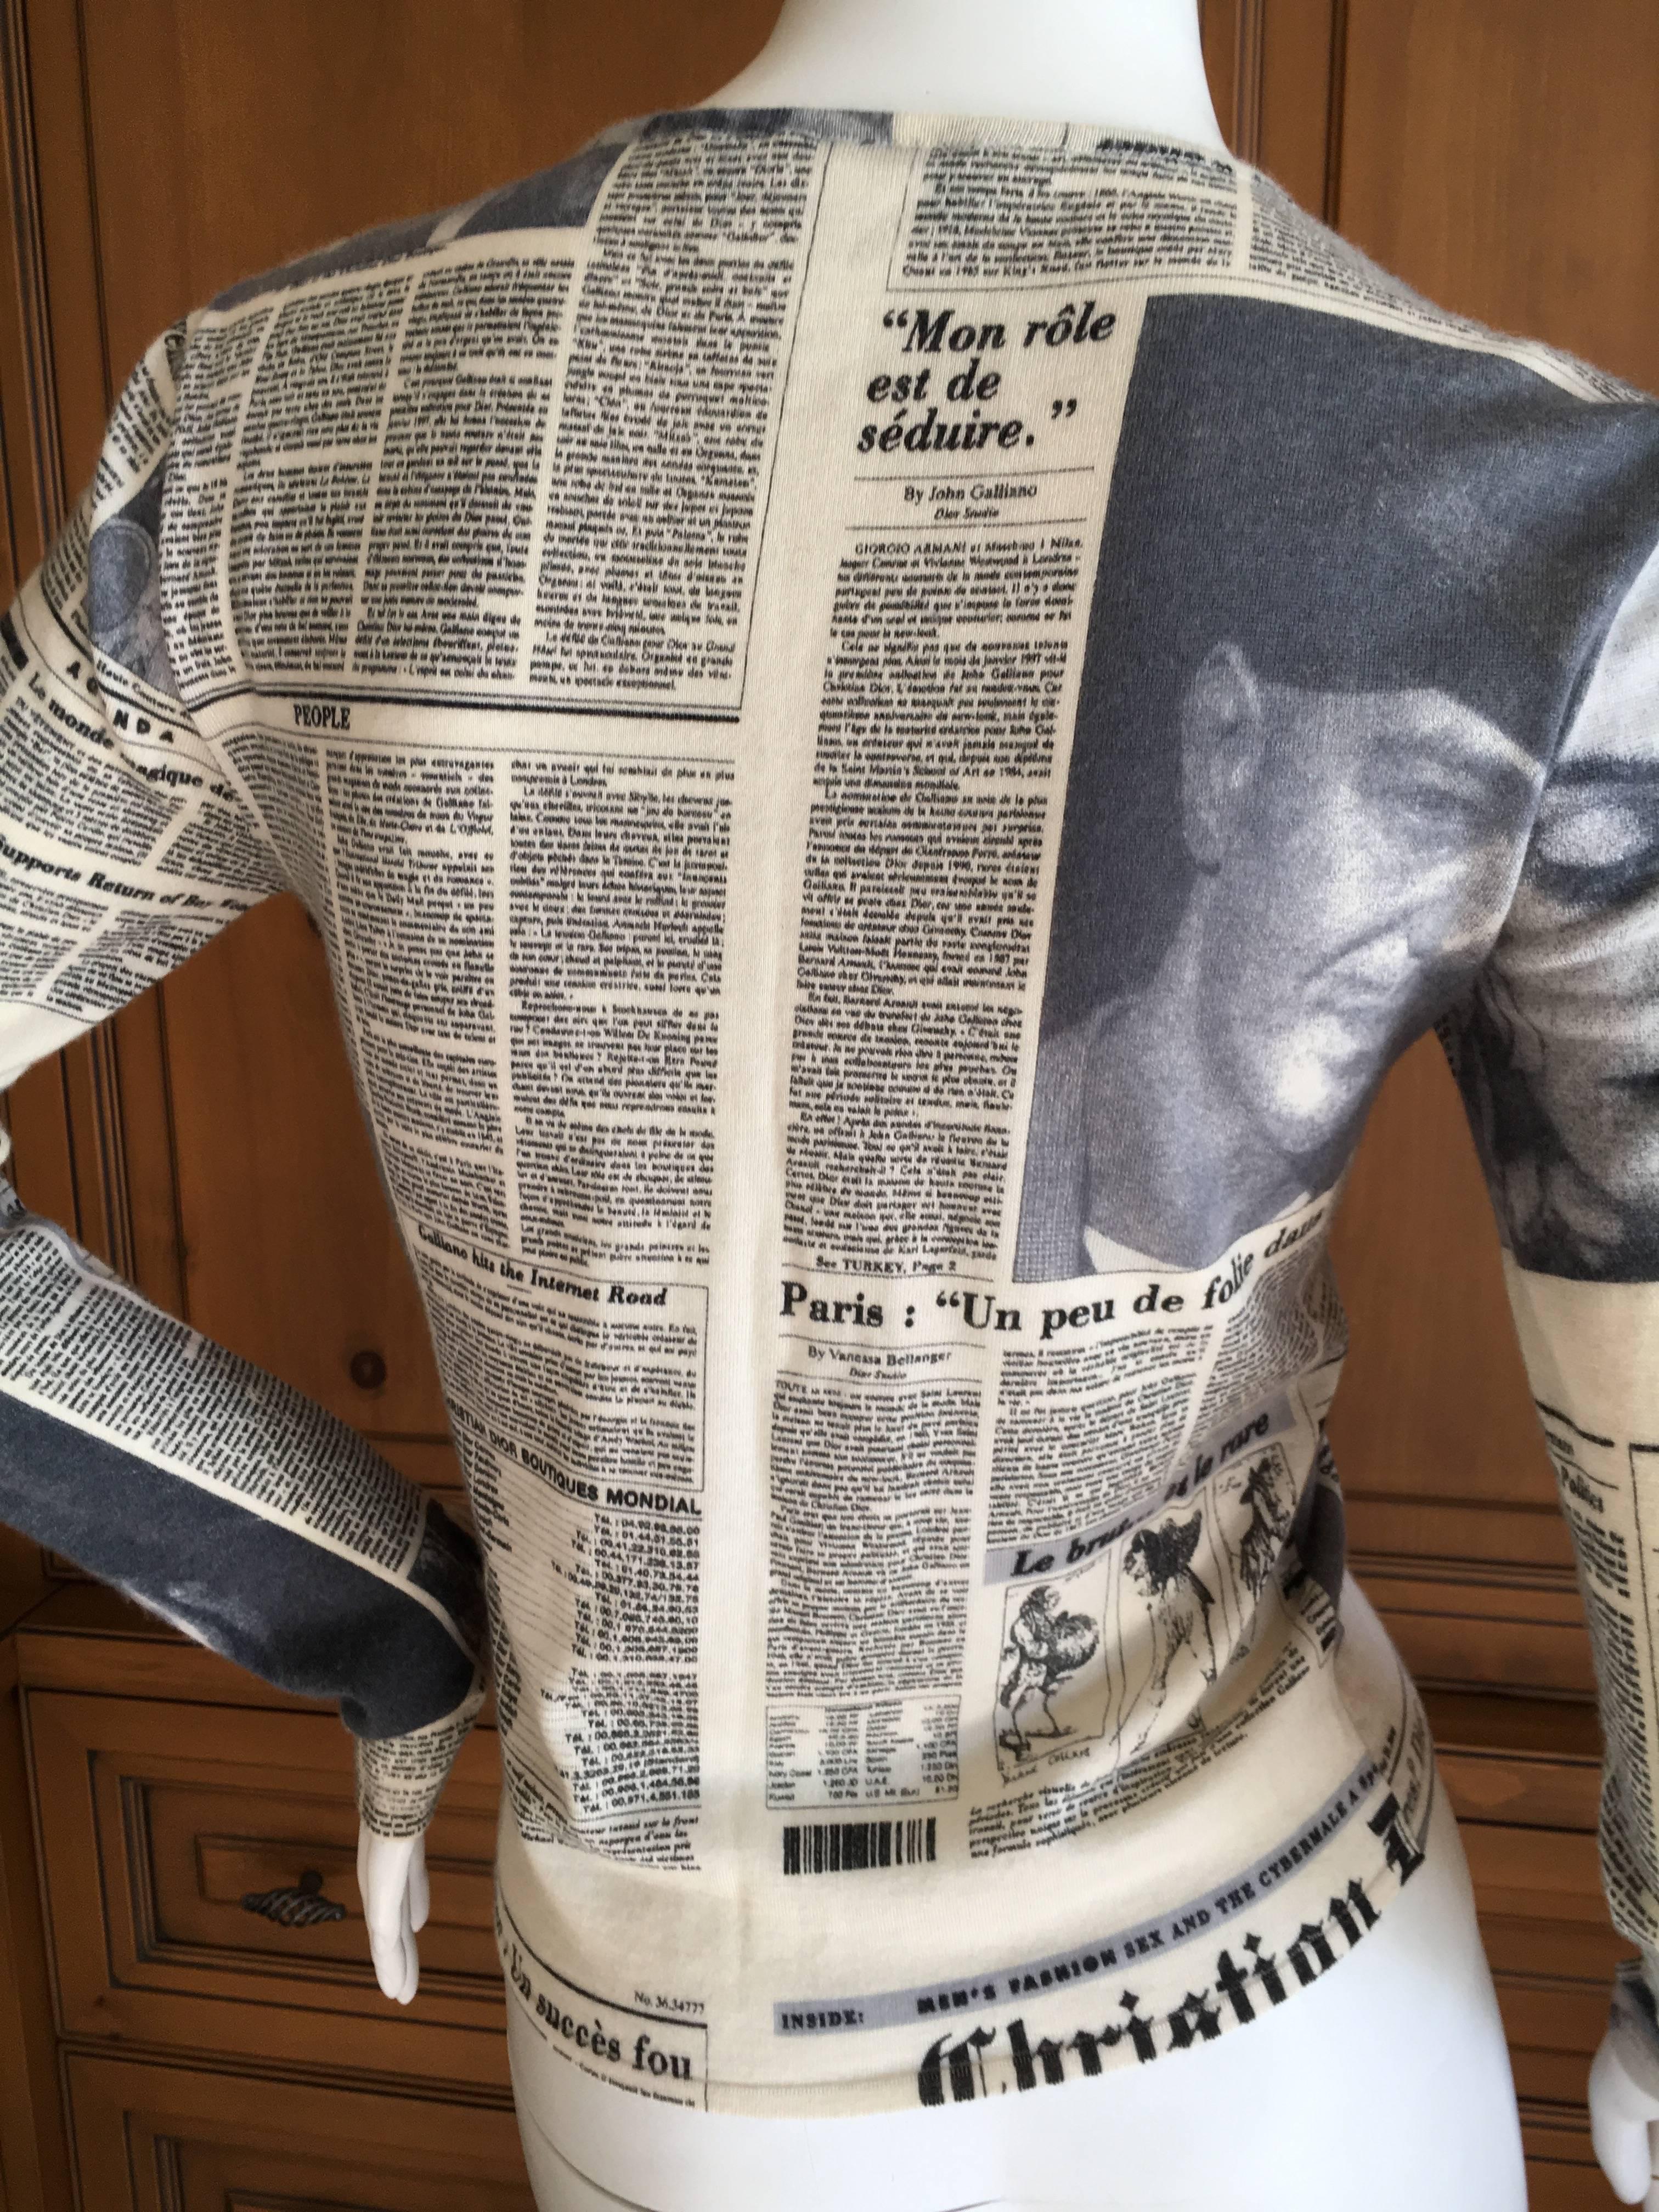 Christian Dior by Galliano Pure Cashmere Dior Gazette Newspaper Print CardiganSize 36"
Bust 34"
Wasit 30"
Length 20"
In excellent , unworn condition